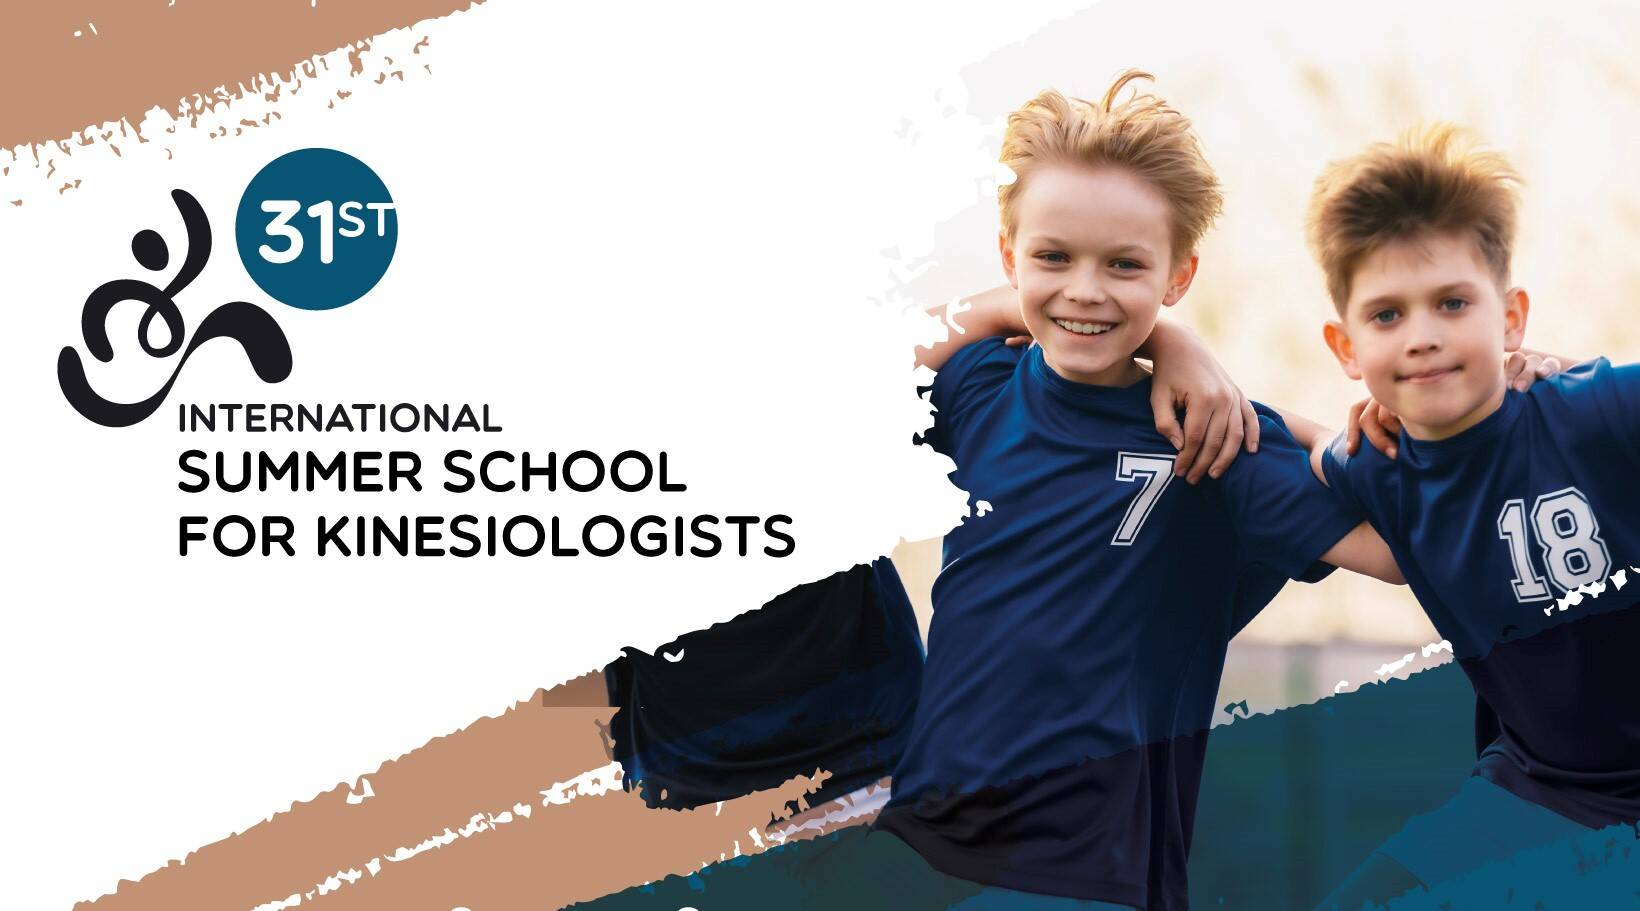 Call for applications for 31st International Summer School for Kinesiologists